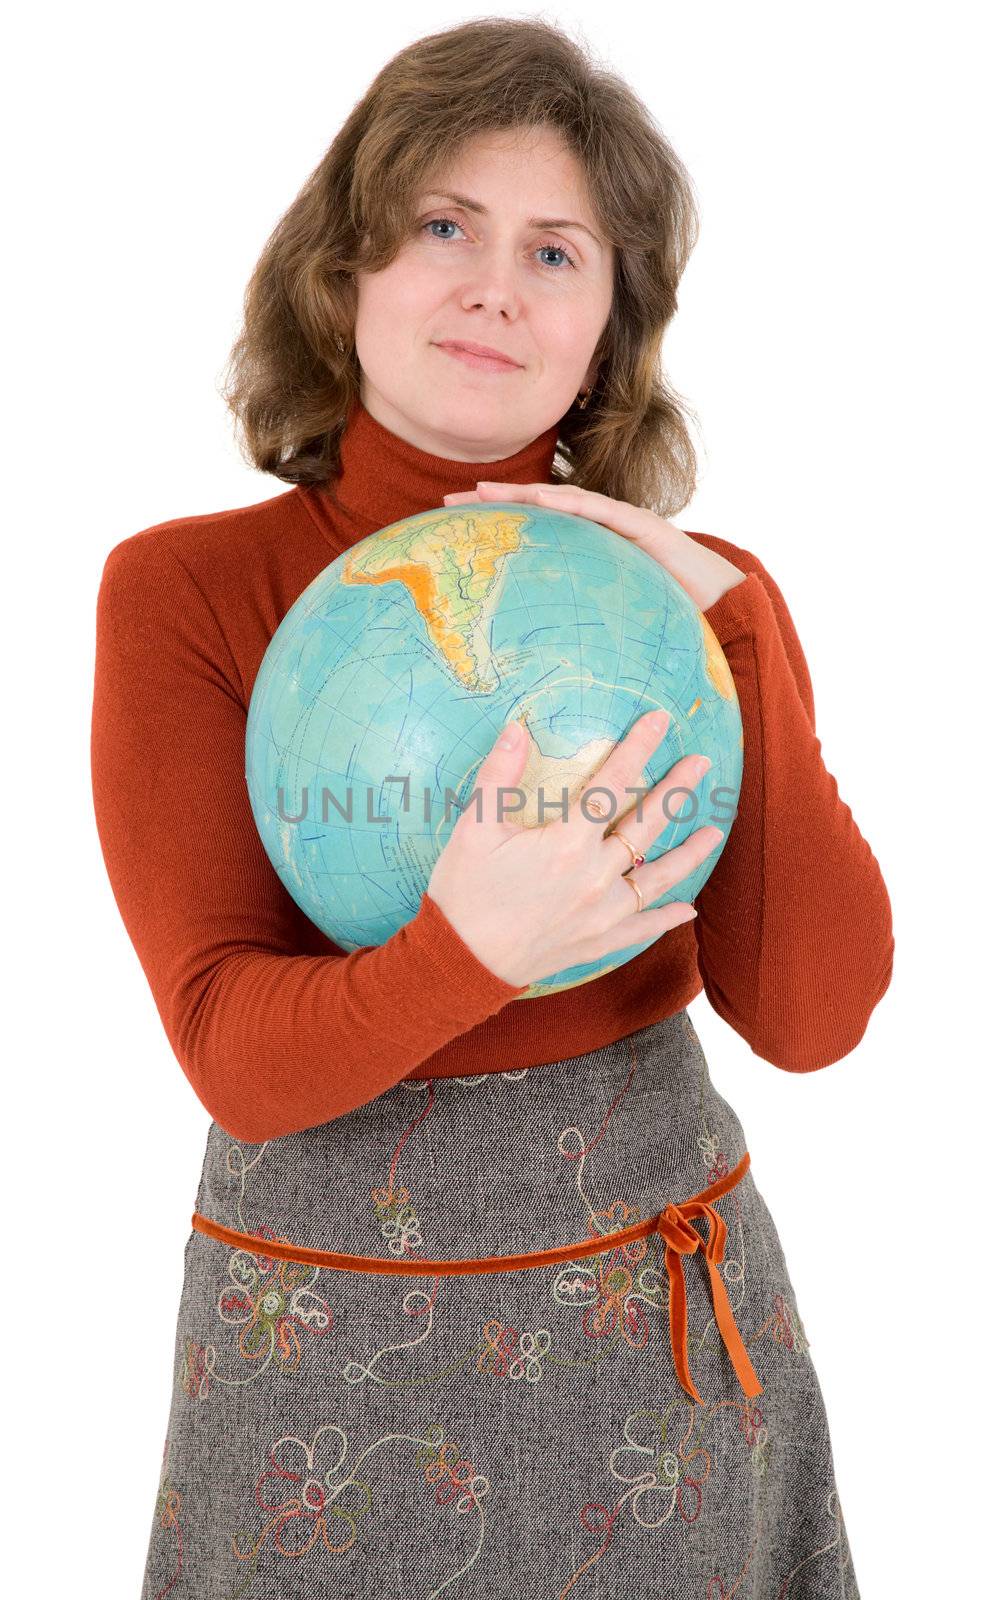 Woman and terrestrial globe by pzaxe